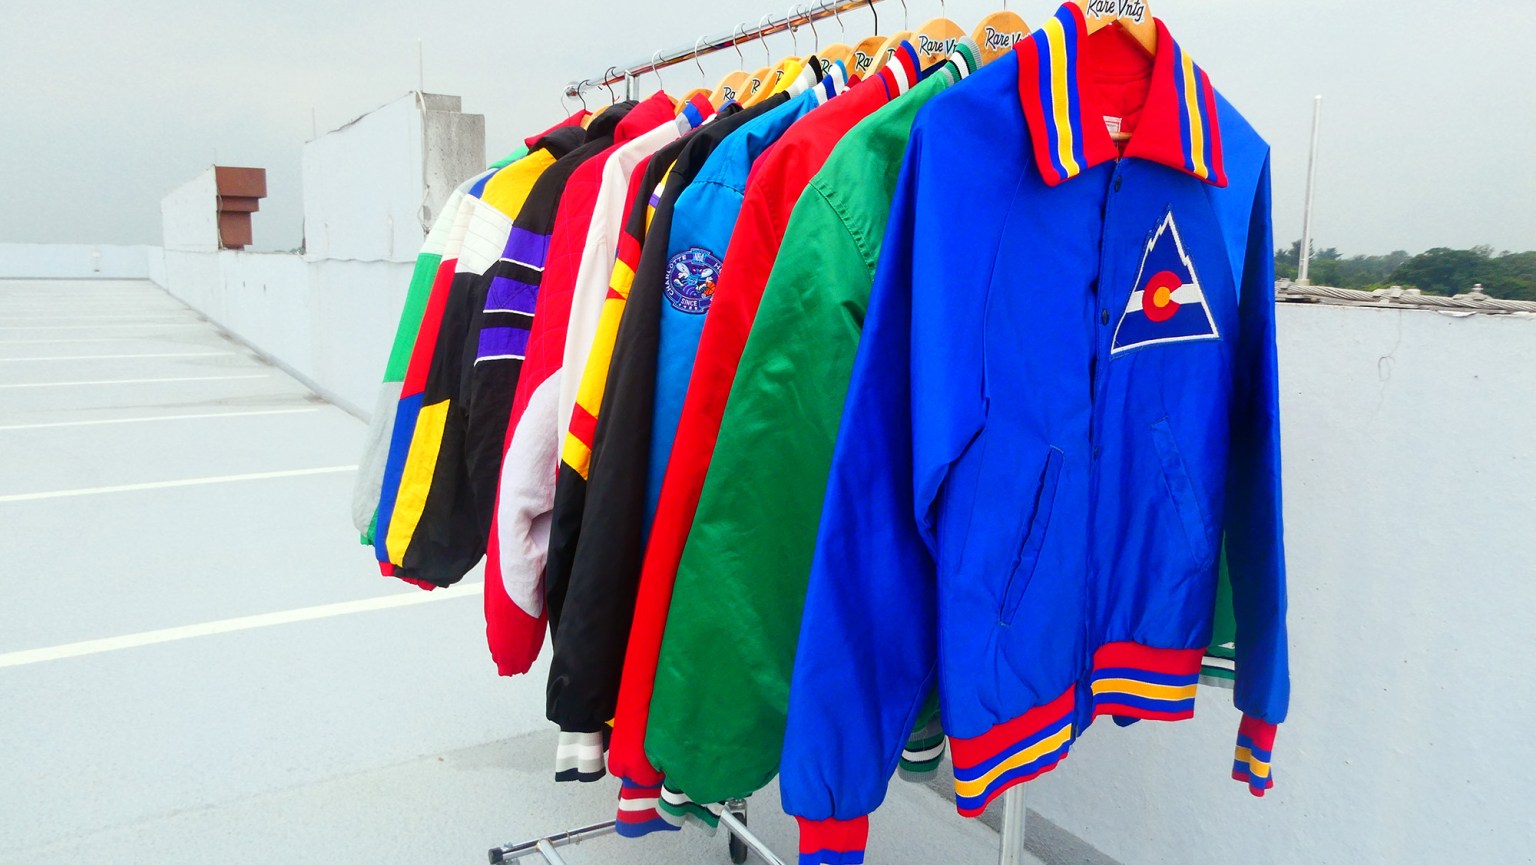 Remember when Starter jackets were the coolest?